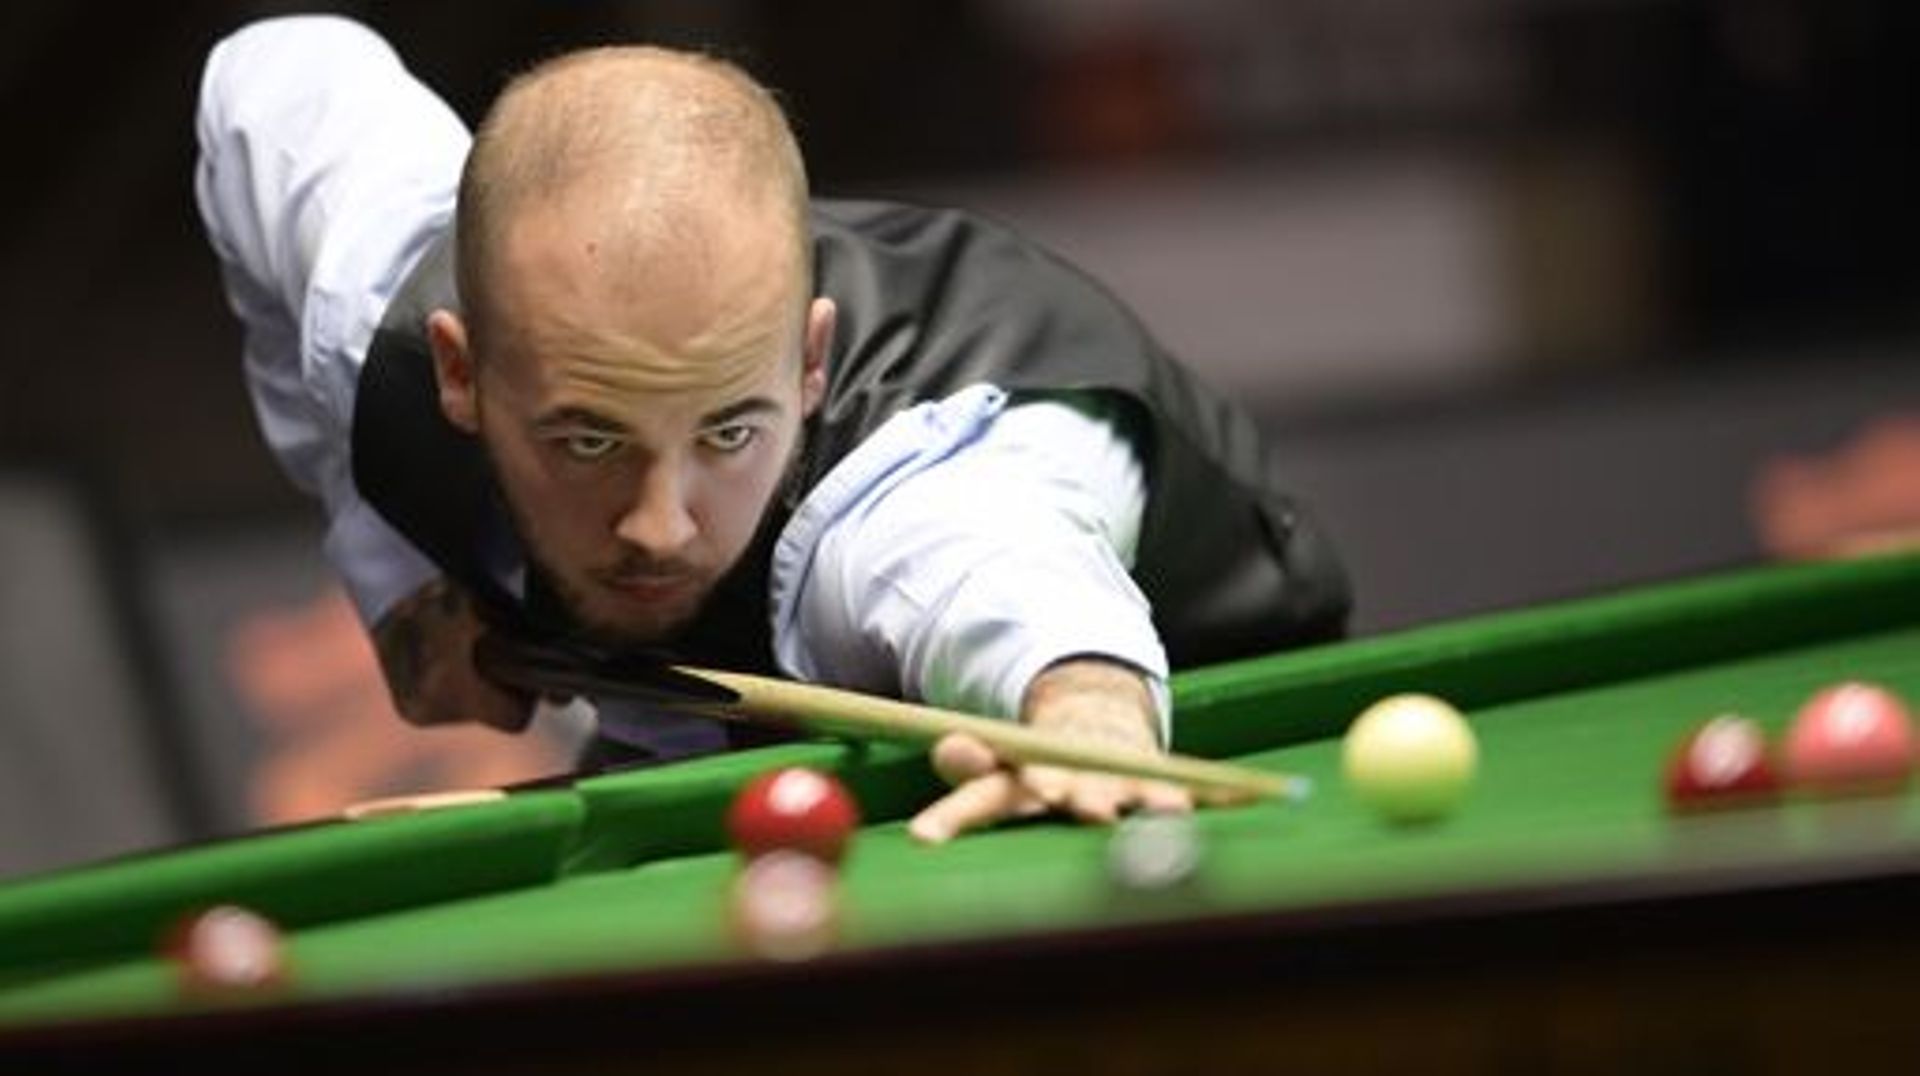 Belgian snooker player Luca Brecel pictured in action during a snooker game between Belgian Luca Brecel and Welsch Daniel Wells, in the first round of the 'European Masters' snooker tournament in Lommel, Monday 01 October 2018. BELGA PHOTO YORICK JANSENS